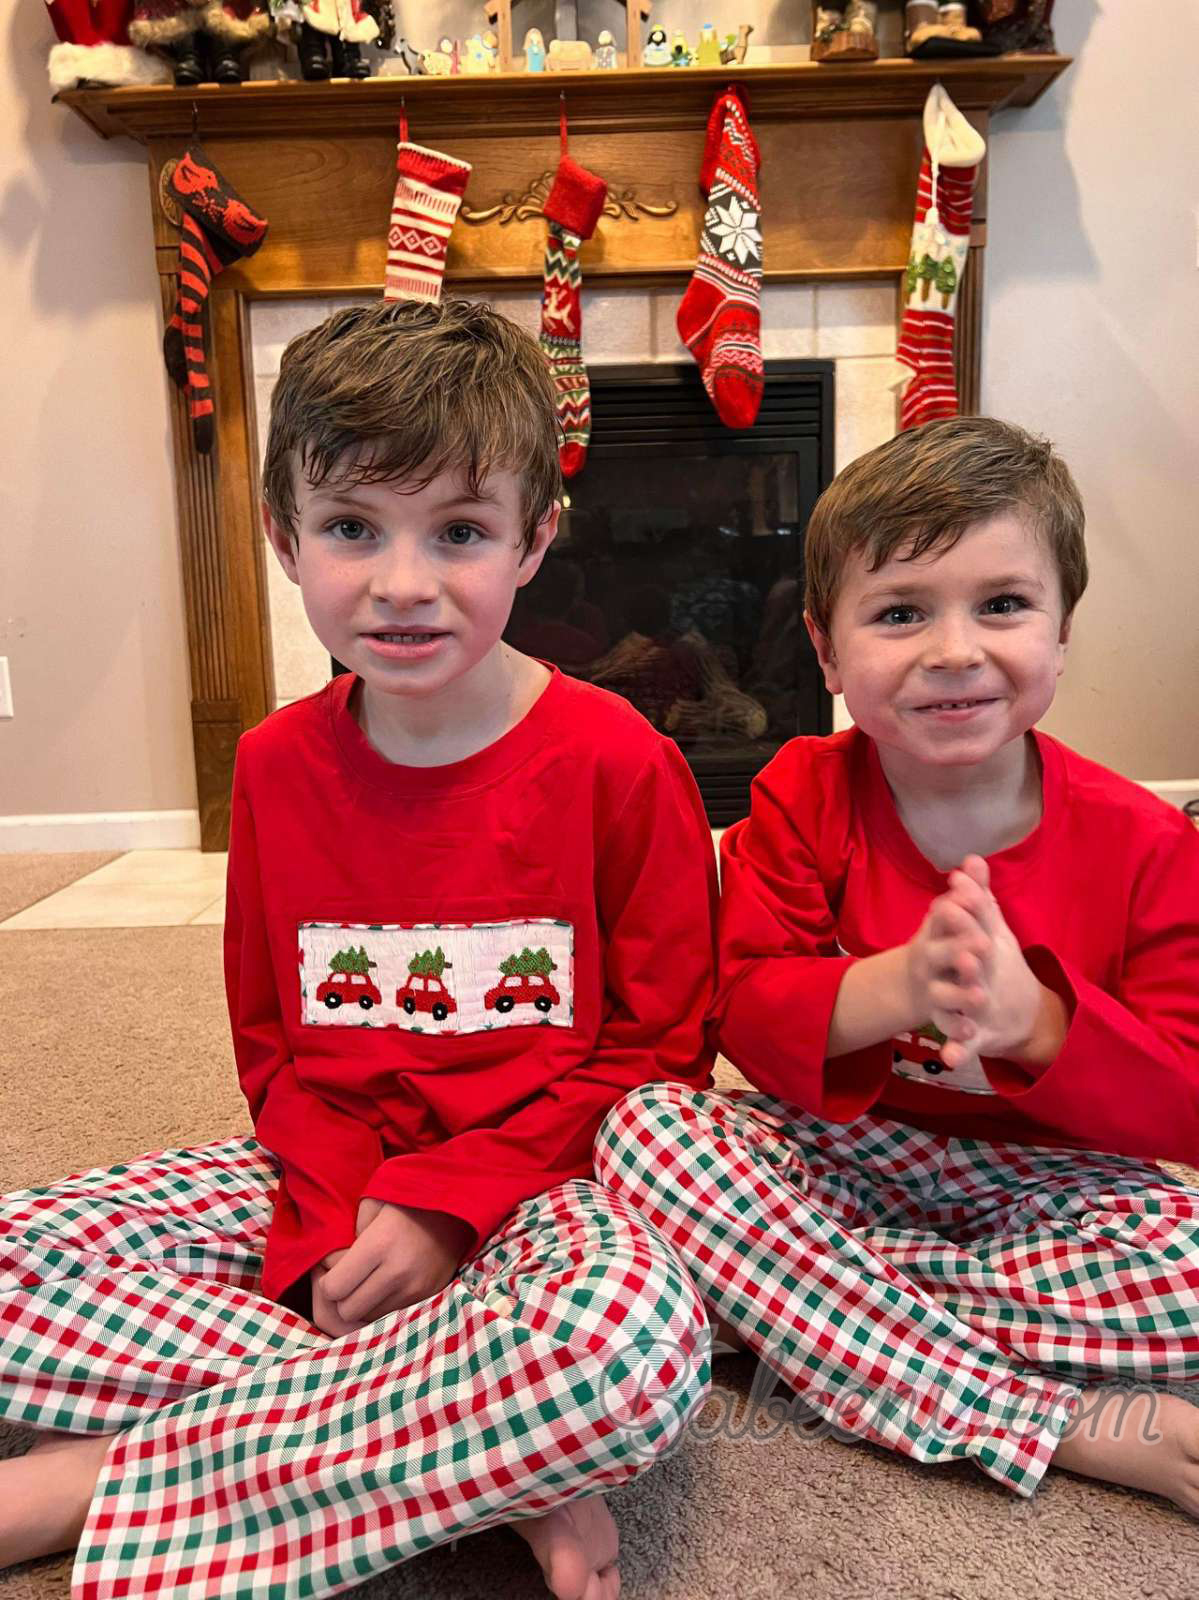 Cute two brother in Christmas clothing